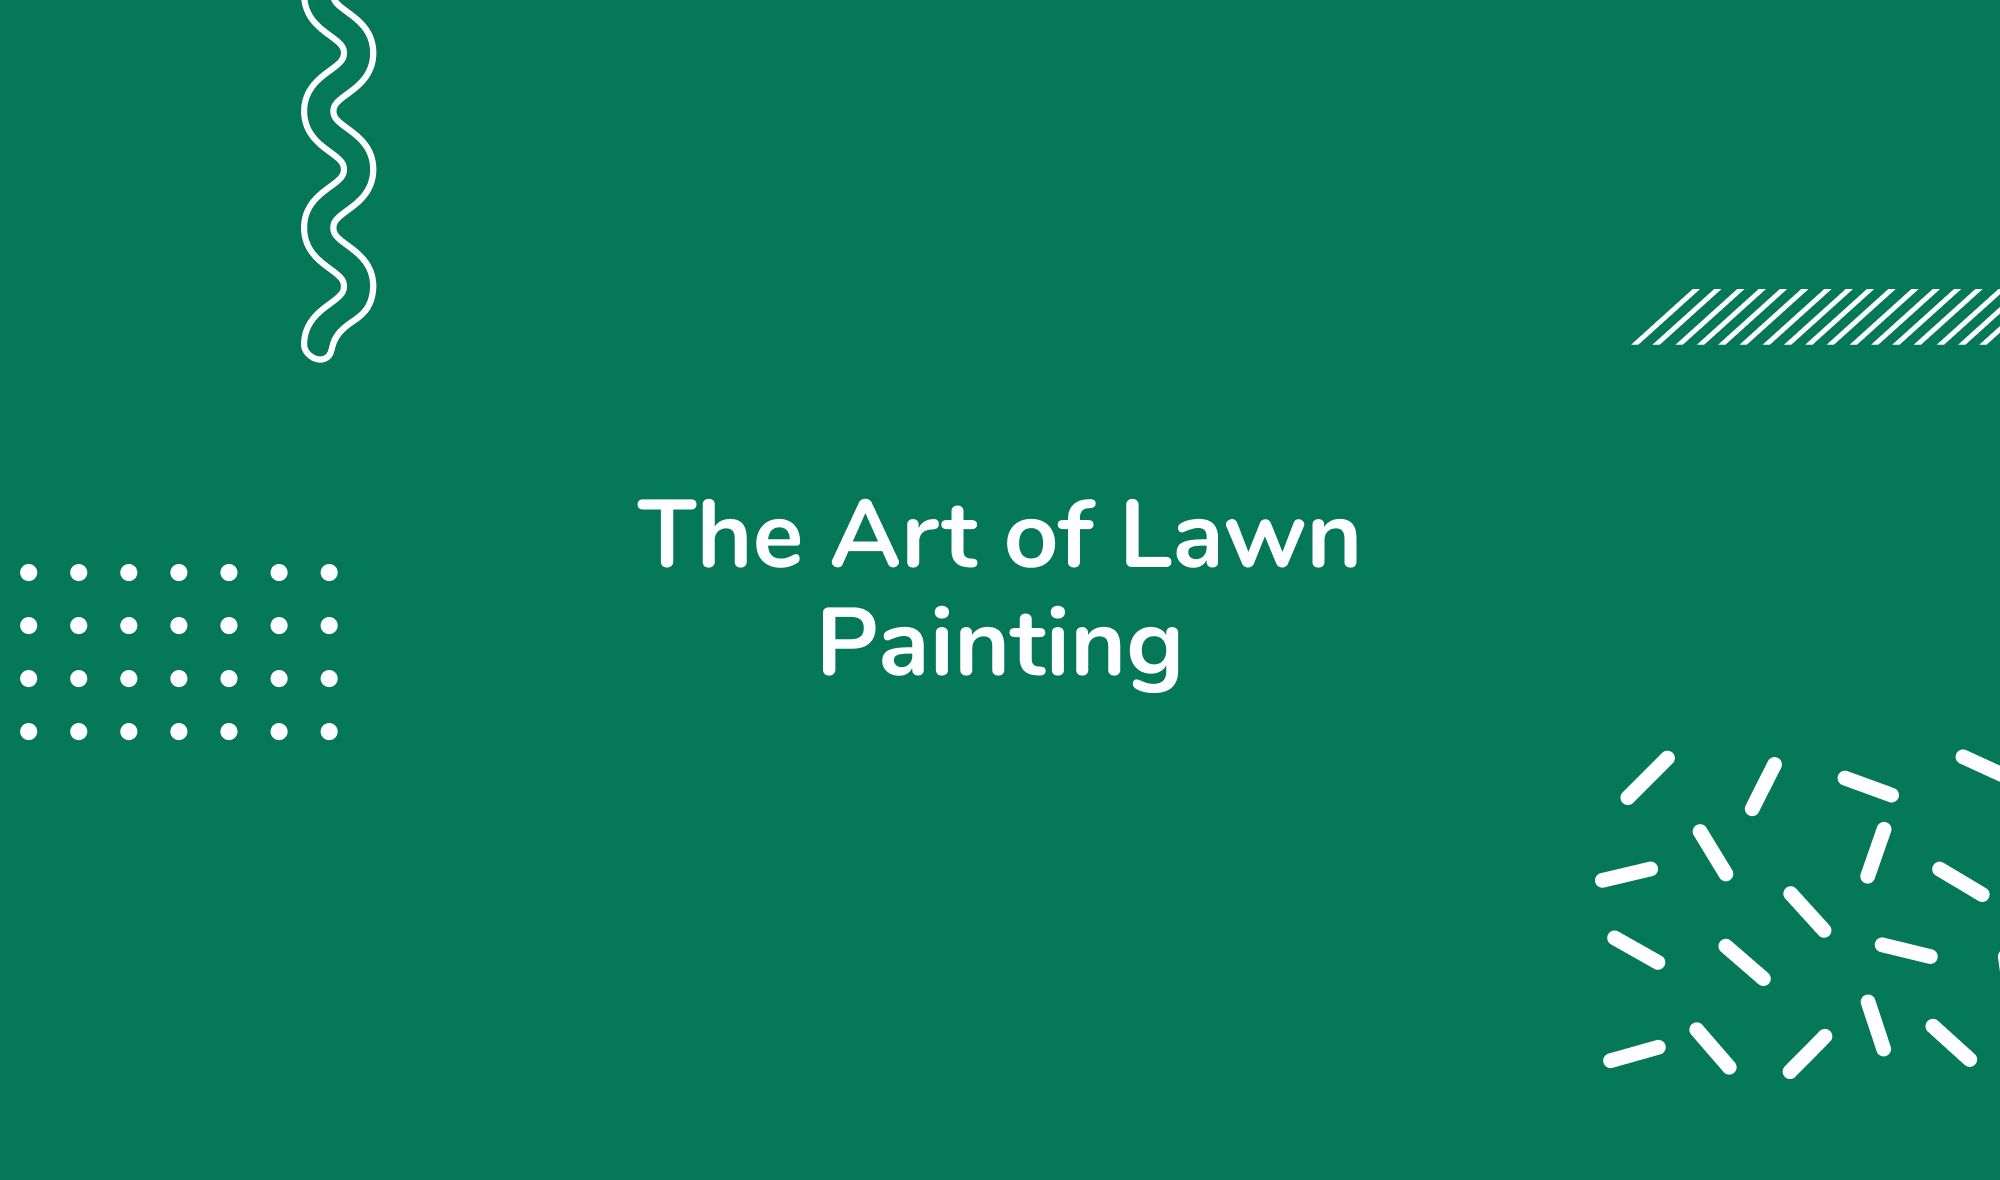 The Art of Lawn Painting: A Detailed Walkthrough